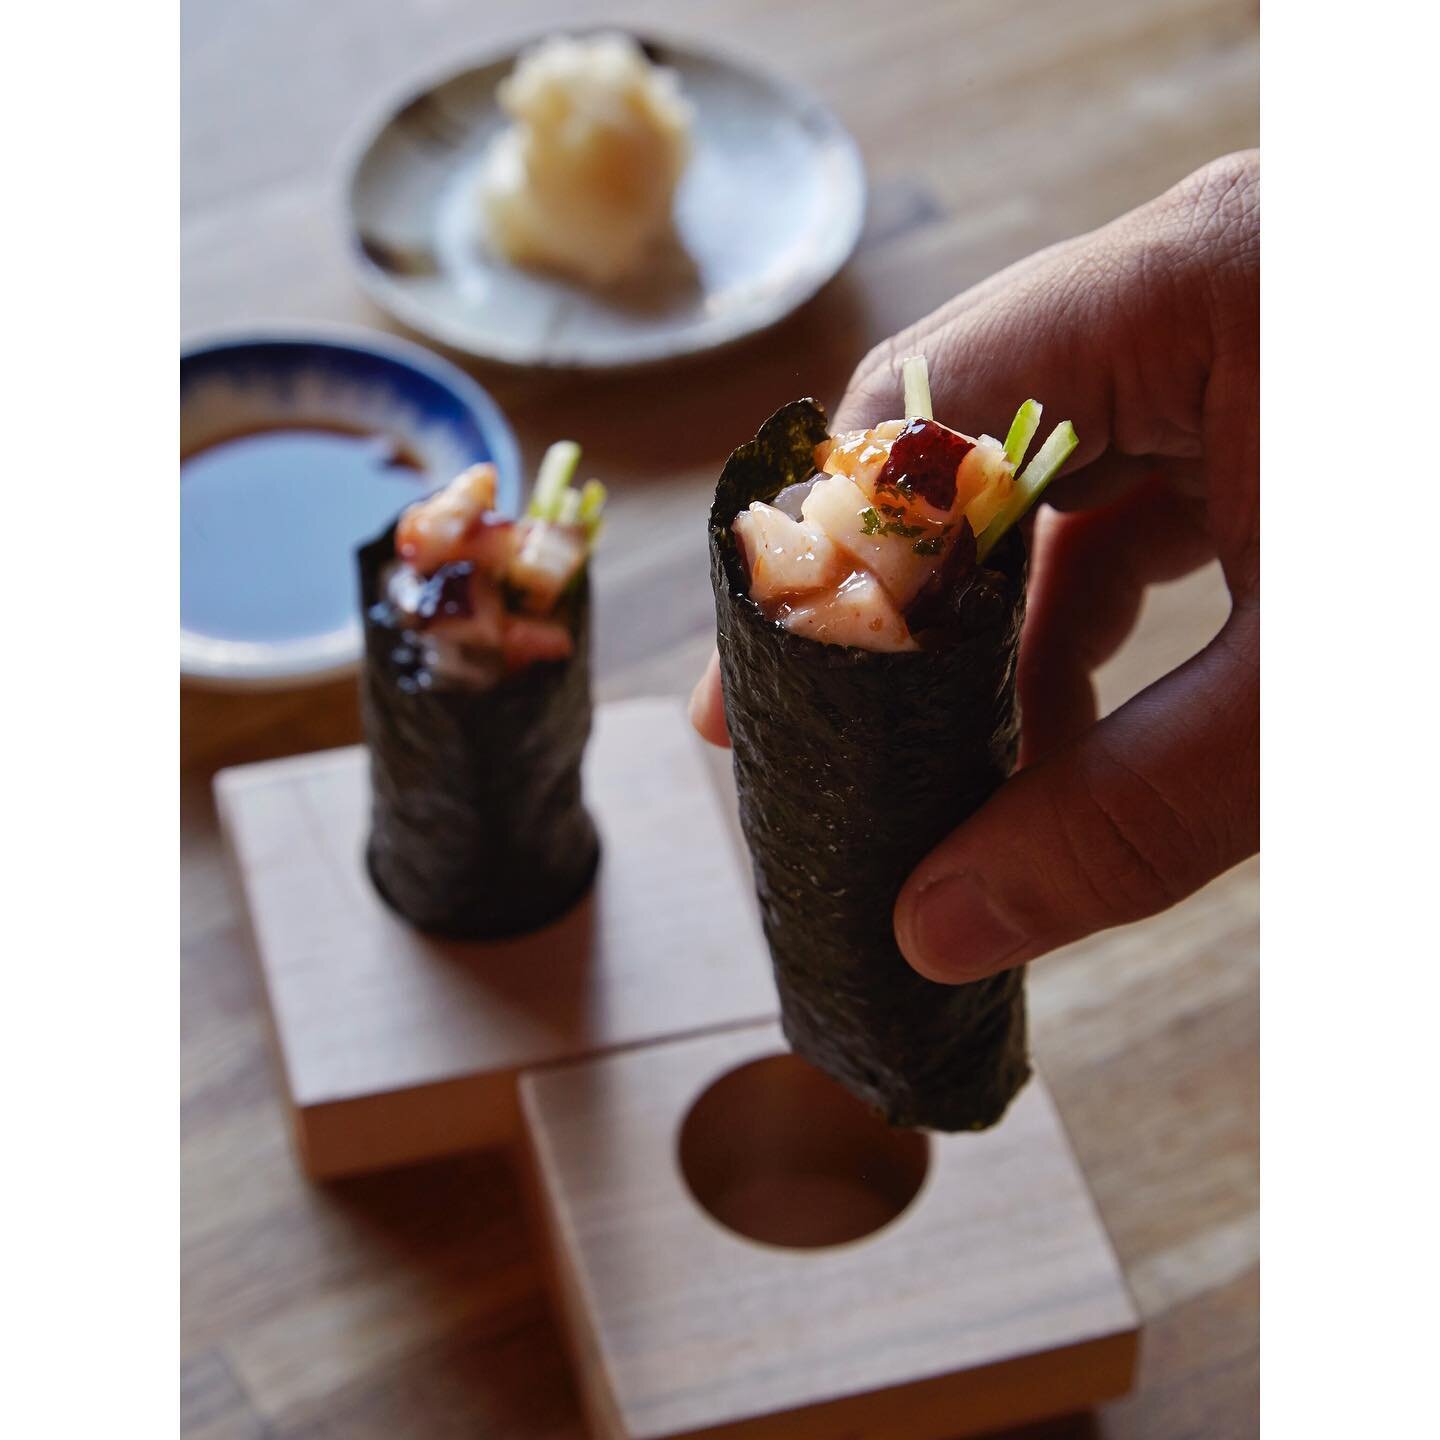 TAKO x UME-KYU
Octopus sashimi, honey ume-jam, cucumber, shiso pesto. Mmm...freshness overload.
*Available only for dine-in at dinner time

#temaki #handrolls #sushilovers

&mdash;&mdash;&mdash;&mdash;&mdash;
Now we&rsquo;re serving a full menu for o